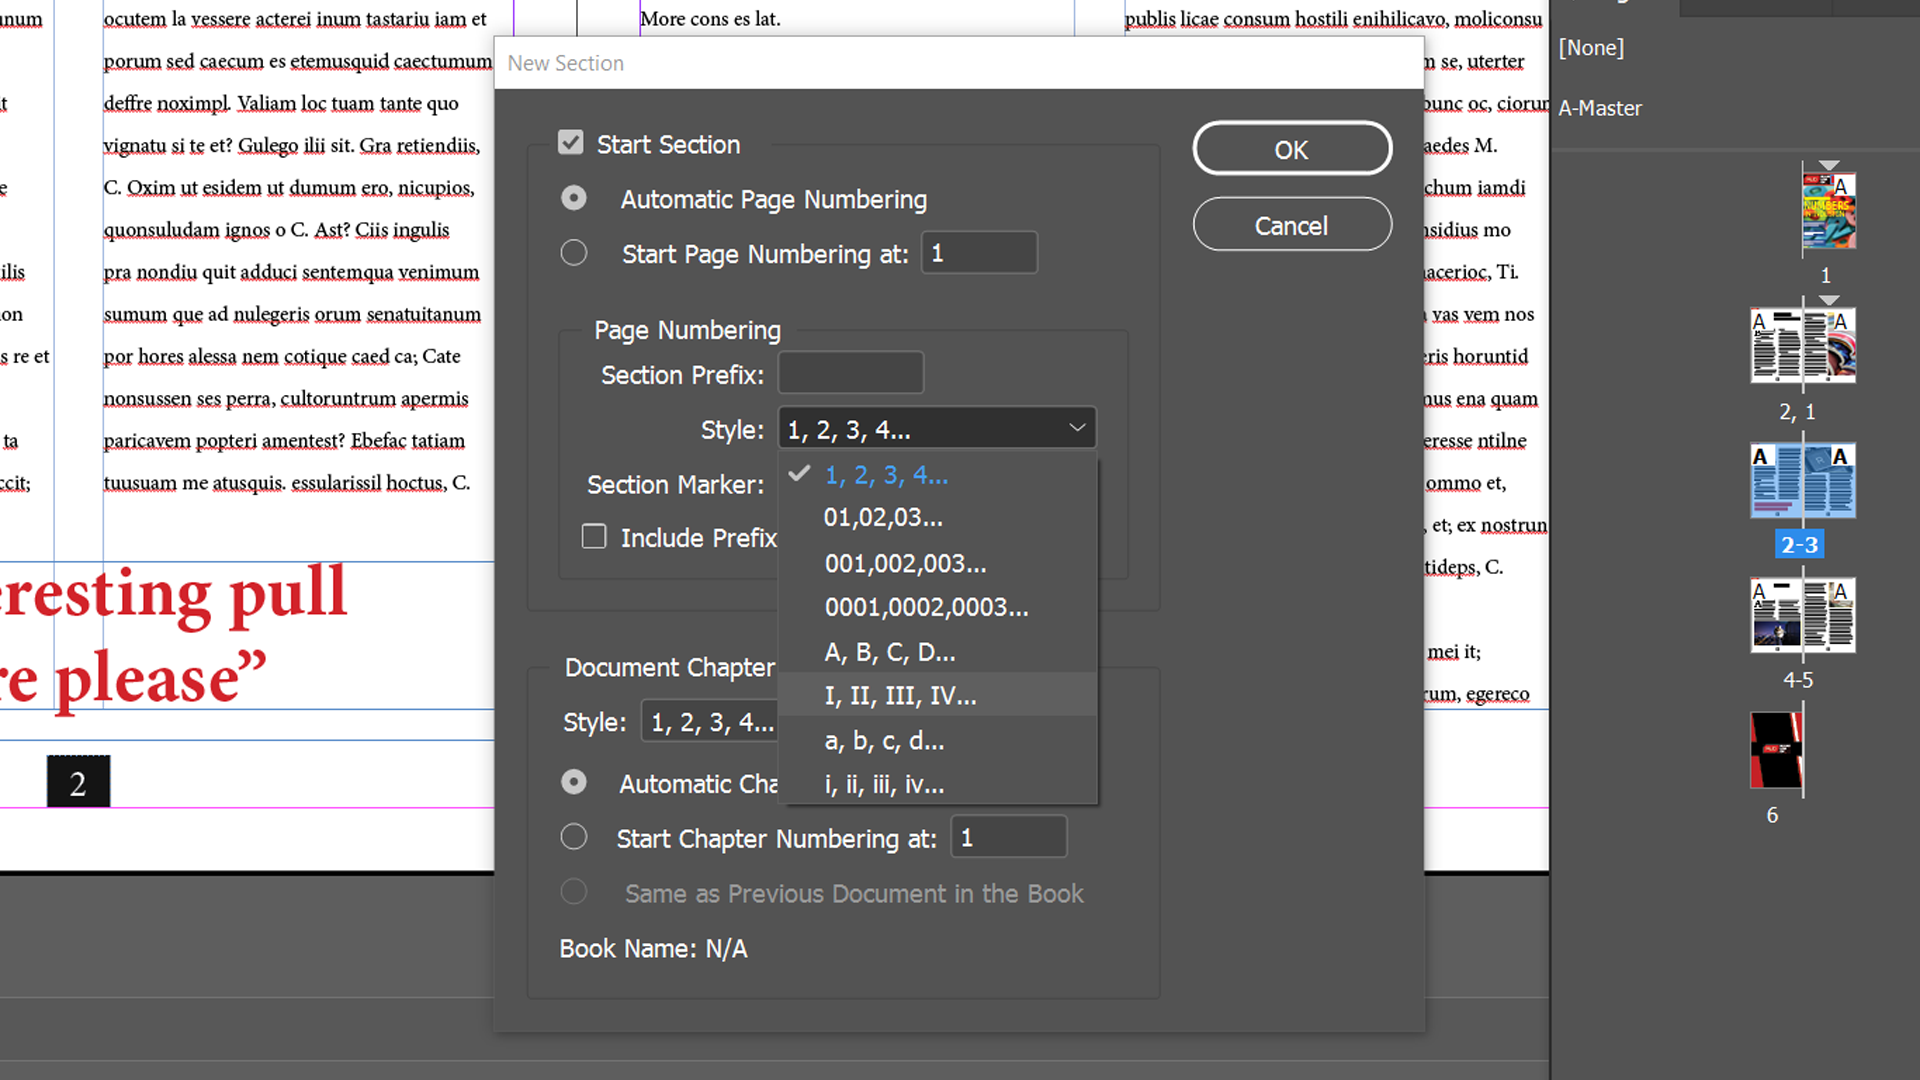 indesign page numbers roman numerals